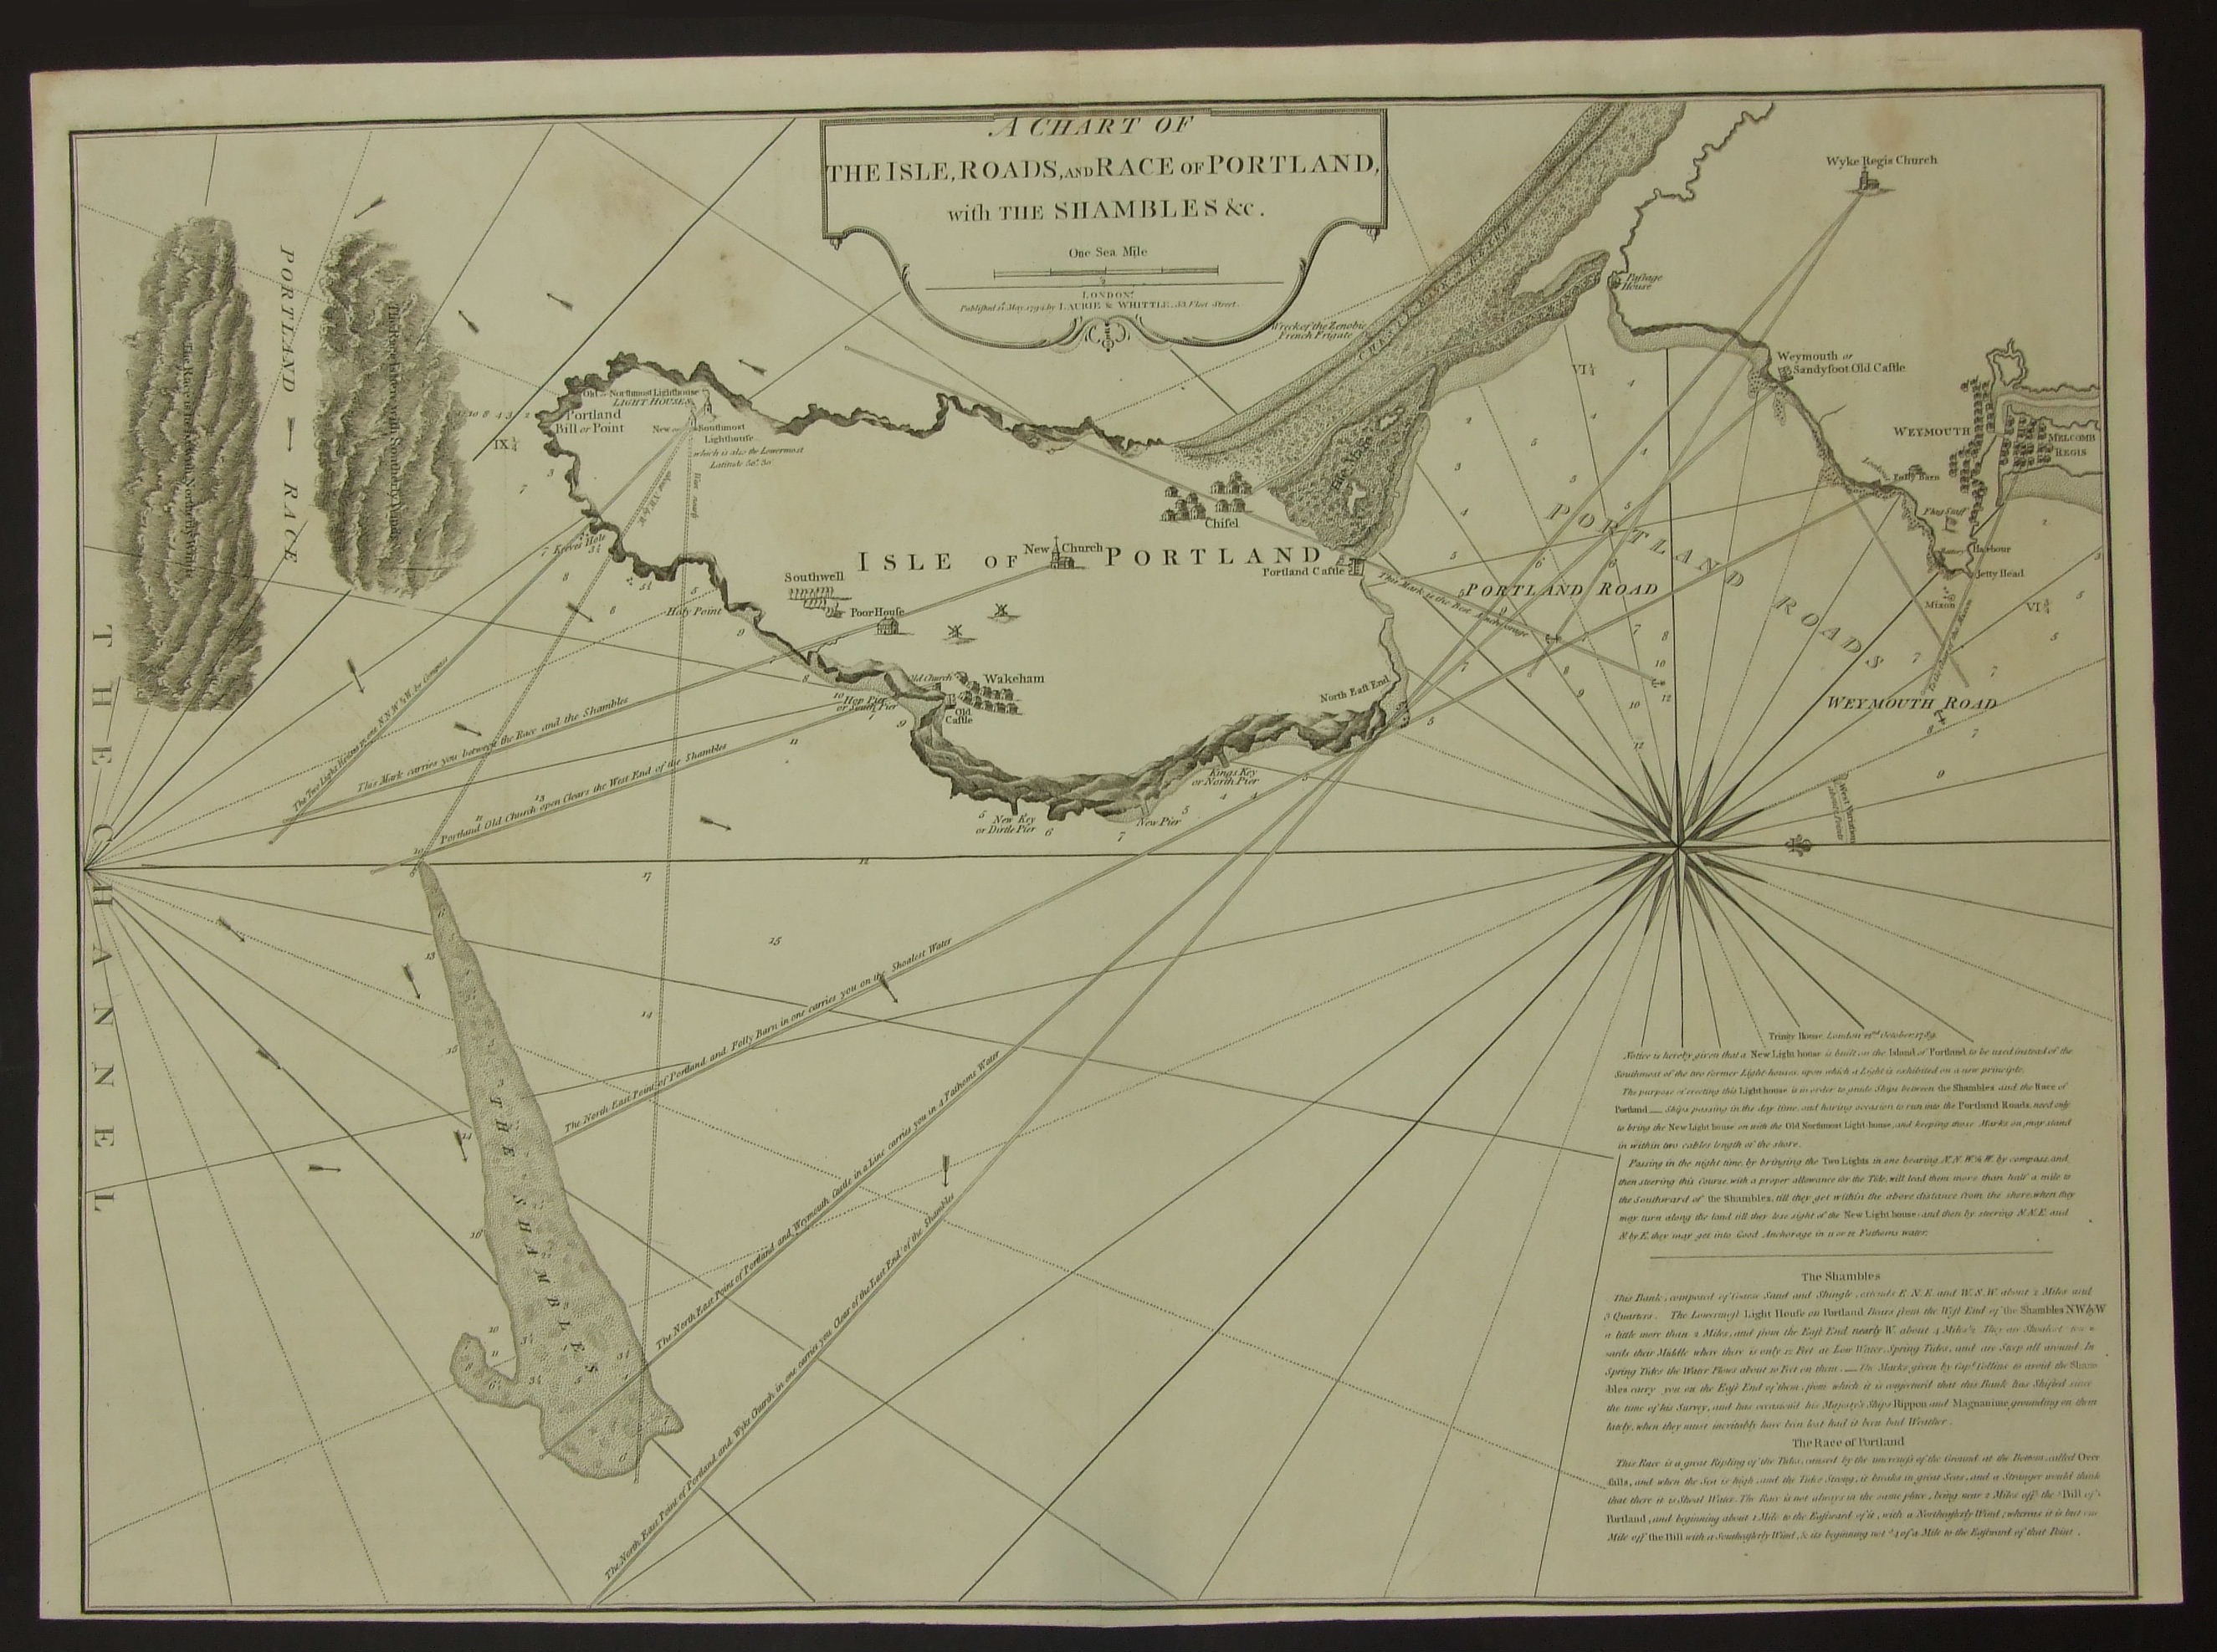 Laurie & Whittle, A Chart of The Isle, Roads and Race of Portland, with the Shambles, 53 Fleet